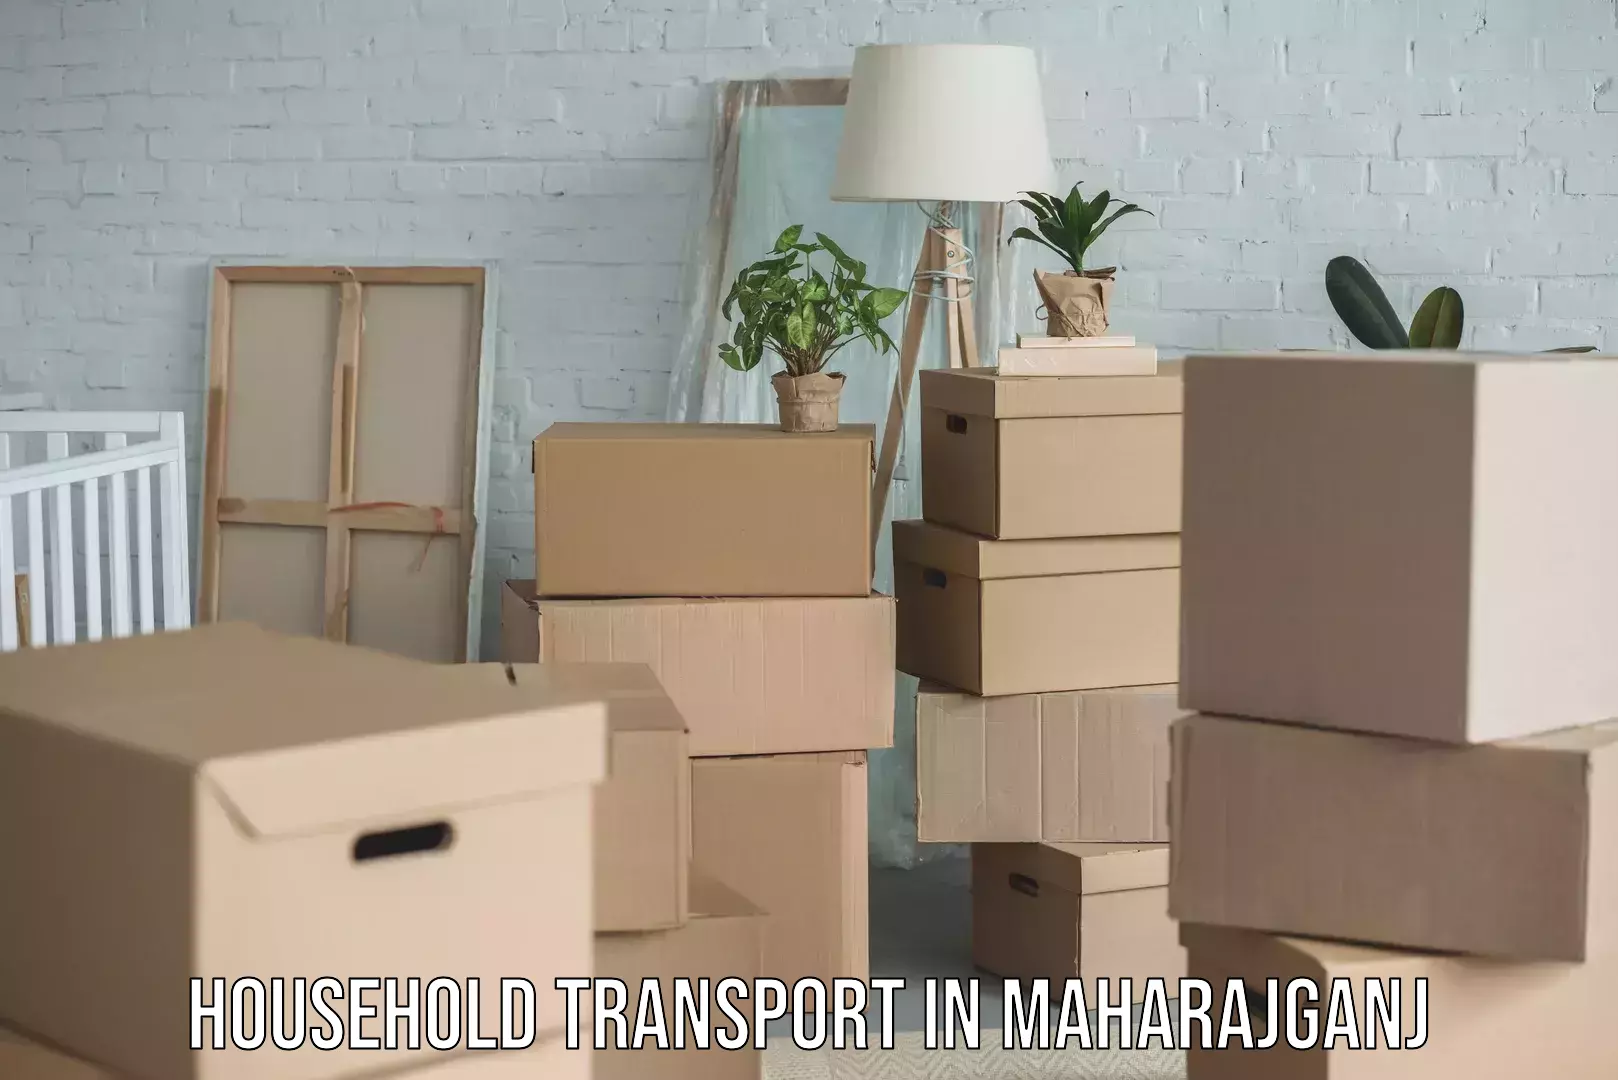 Furniture delivery service in Maharajganj